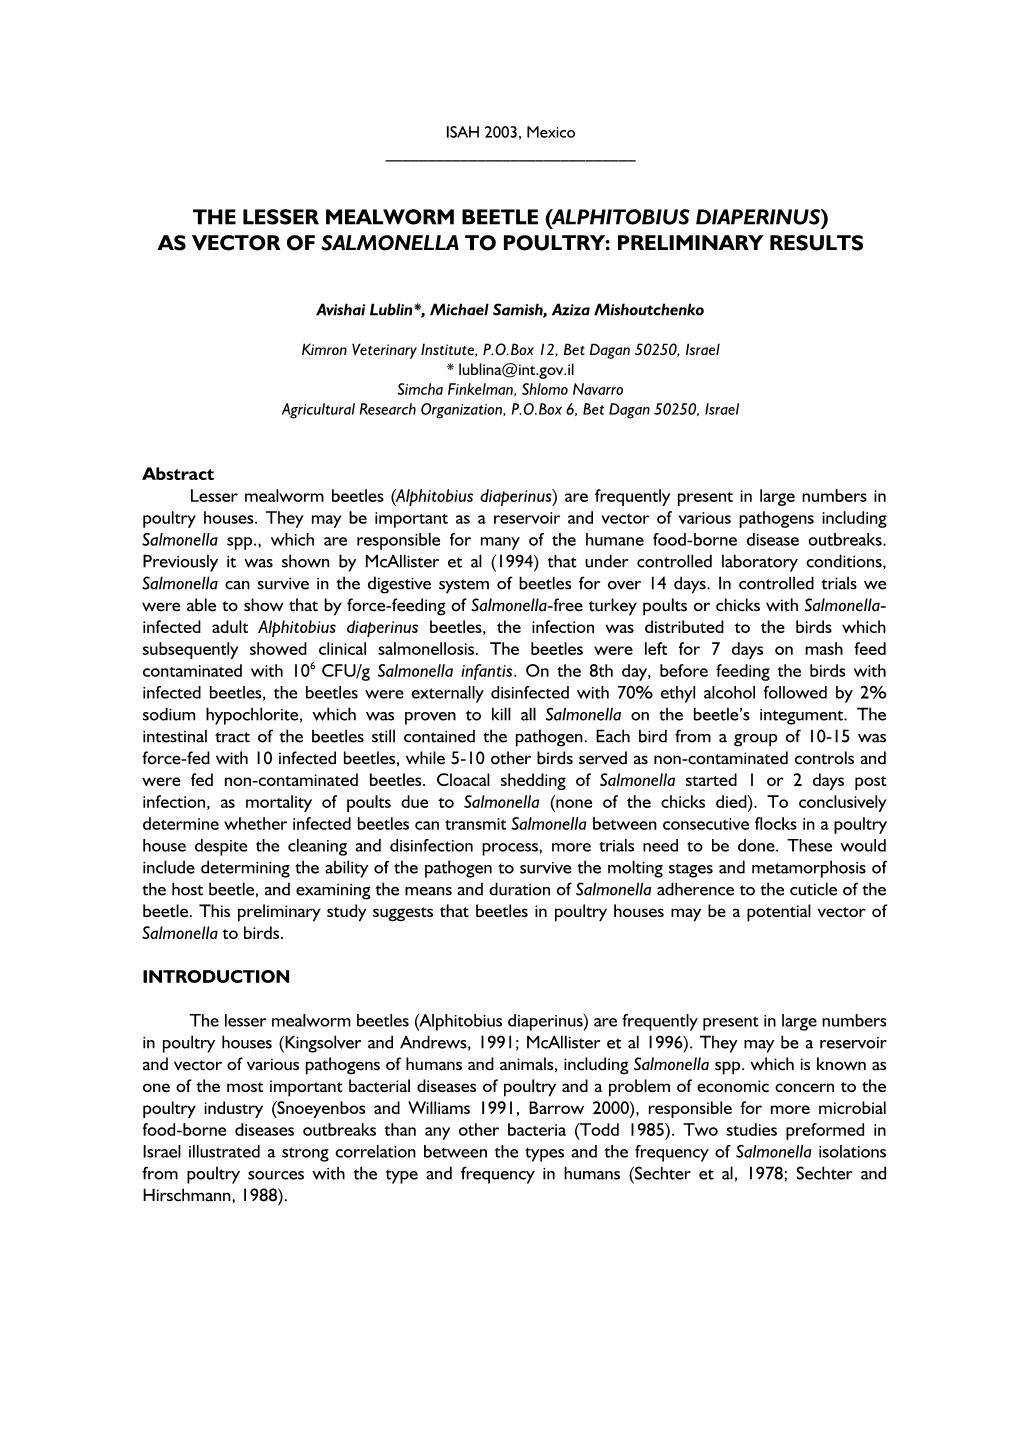 The Lesser Mealworm Beetle (Alphitobius Diaperinus) As Vector of Salmonella to Poultry: Preliminary Results